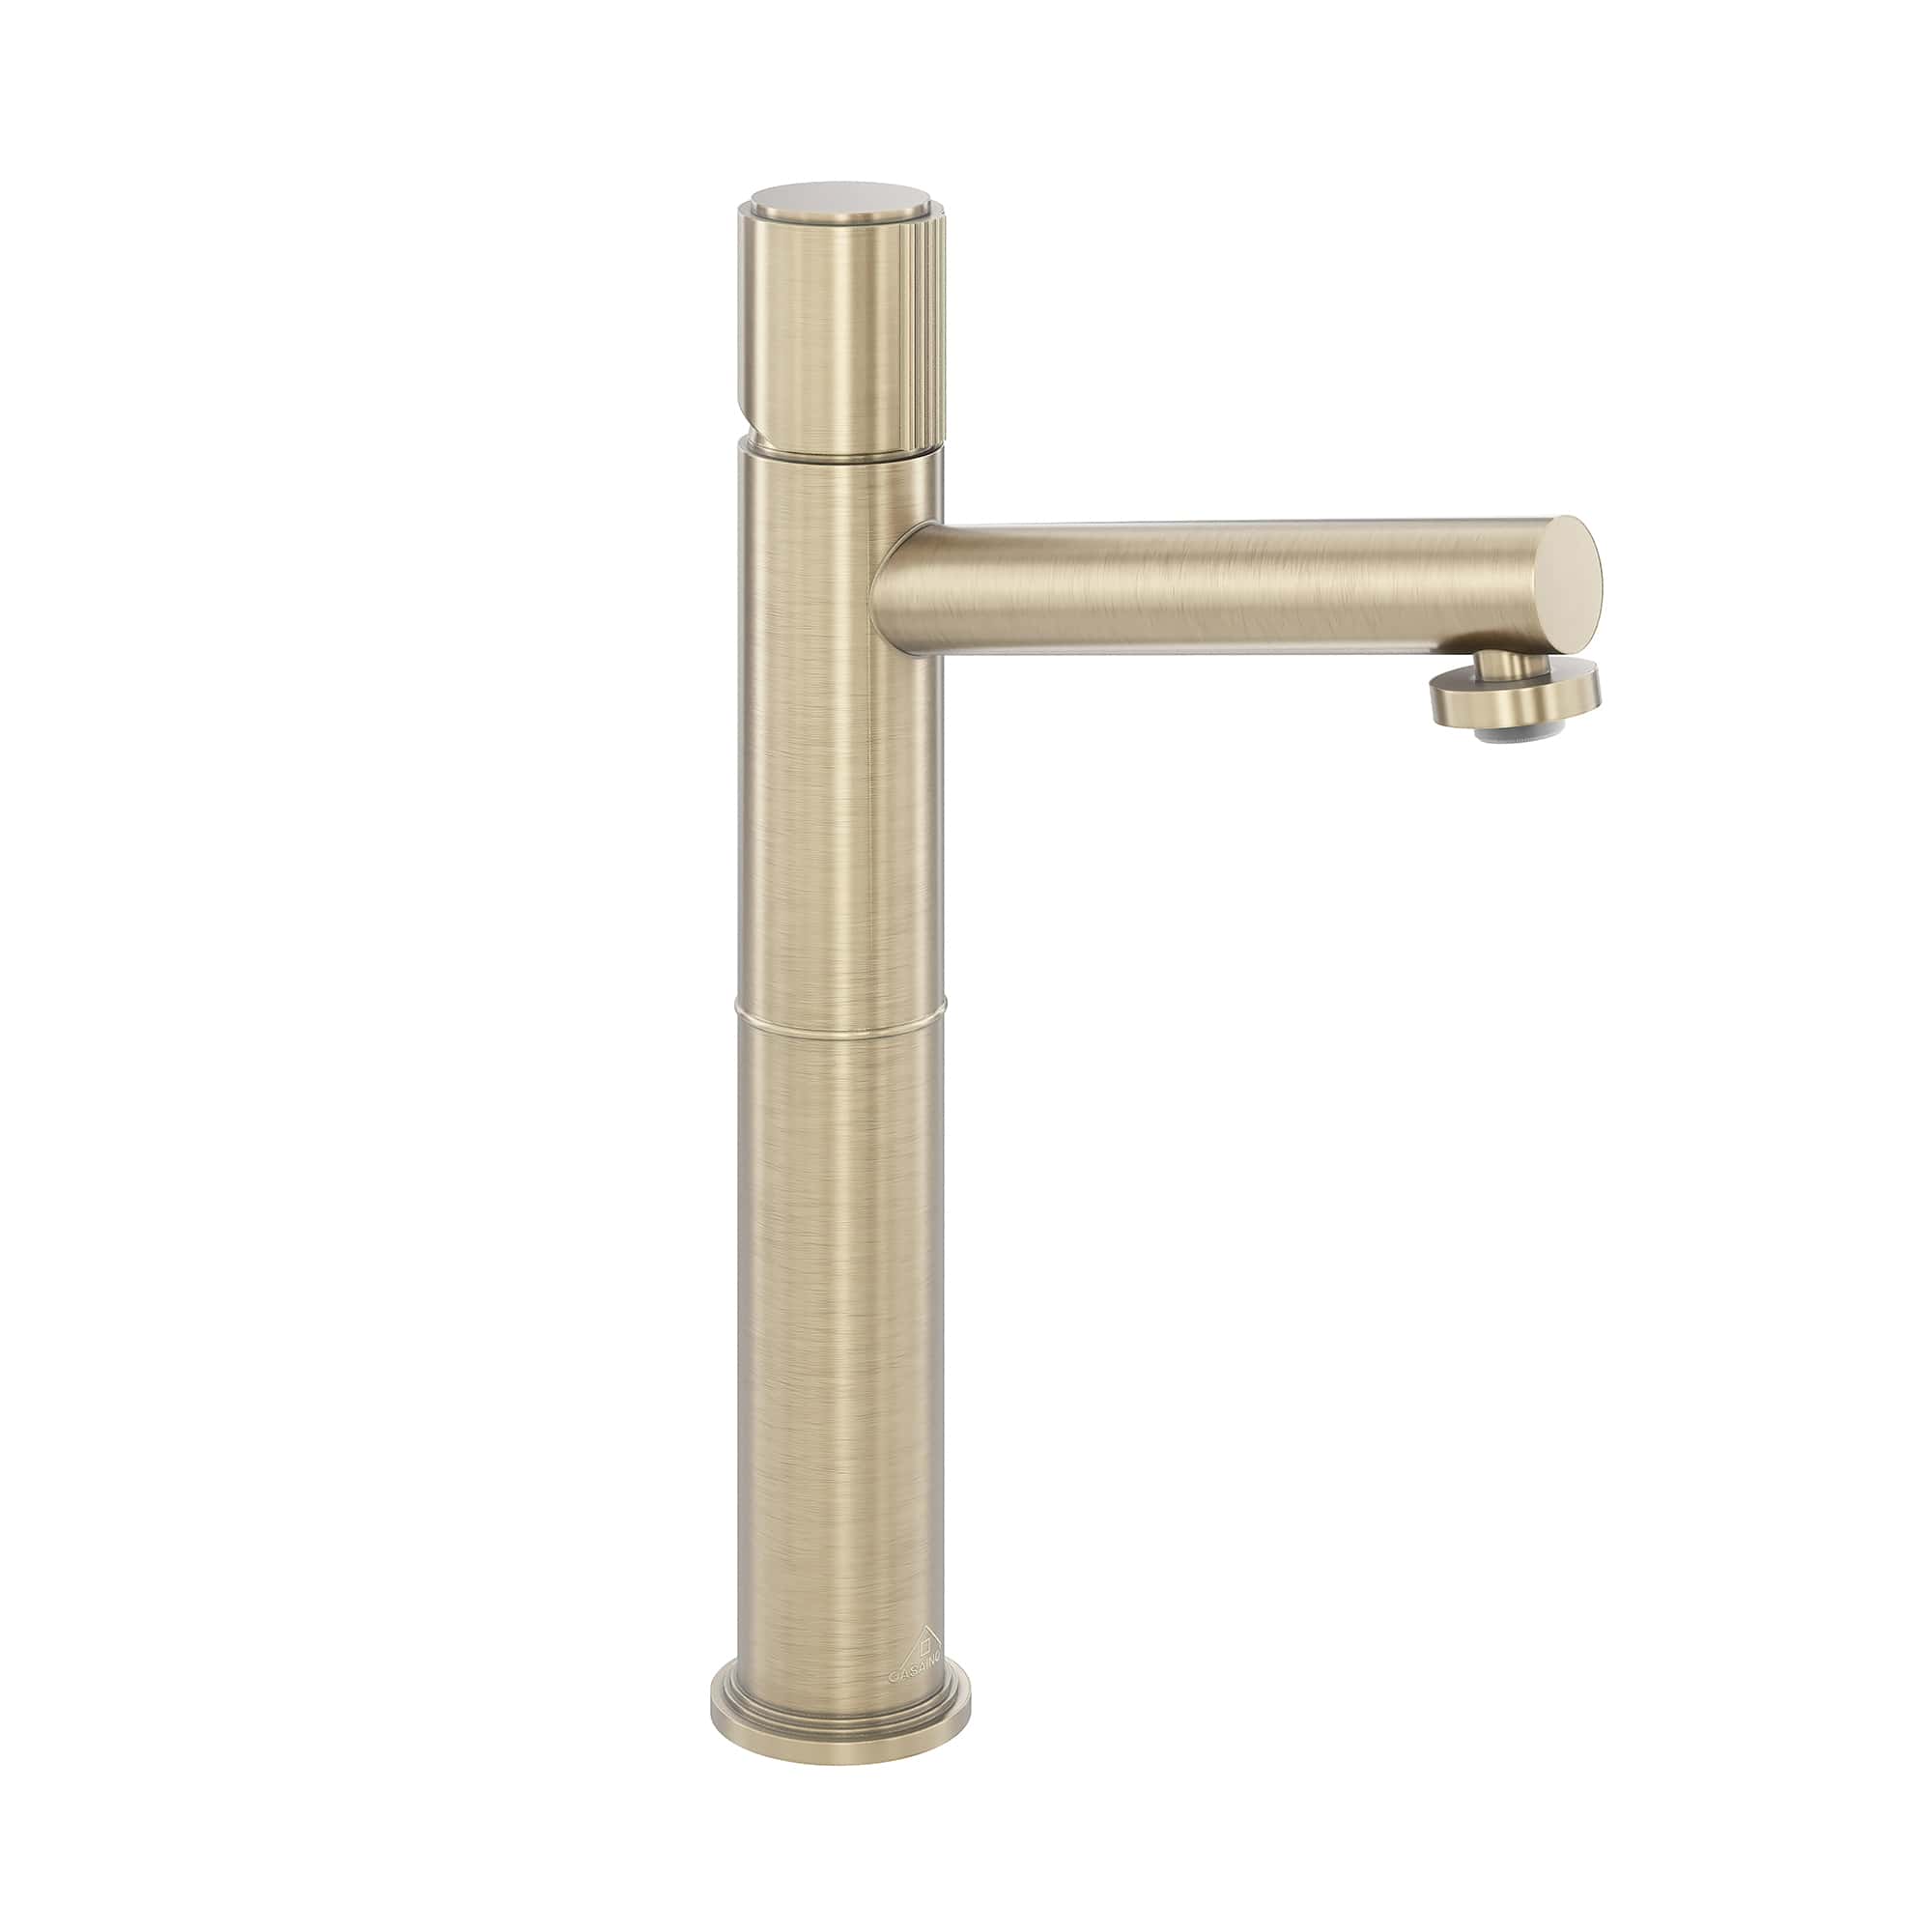 CASAINC 1.2GPM Brushed Champagne Gold Single Handle Basin Faucet with Bounce Drainer